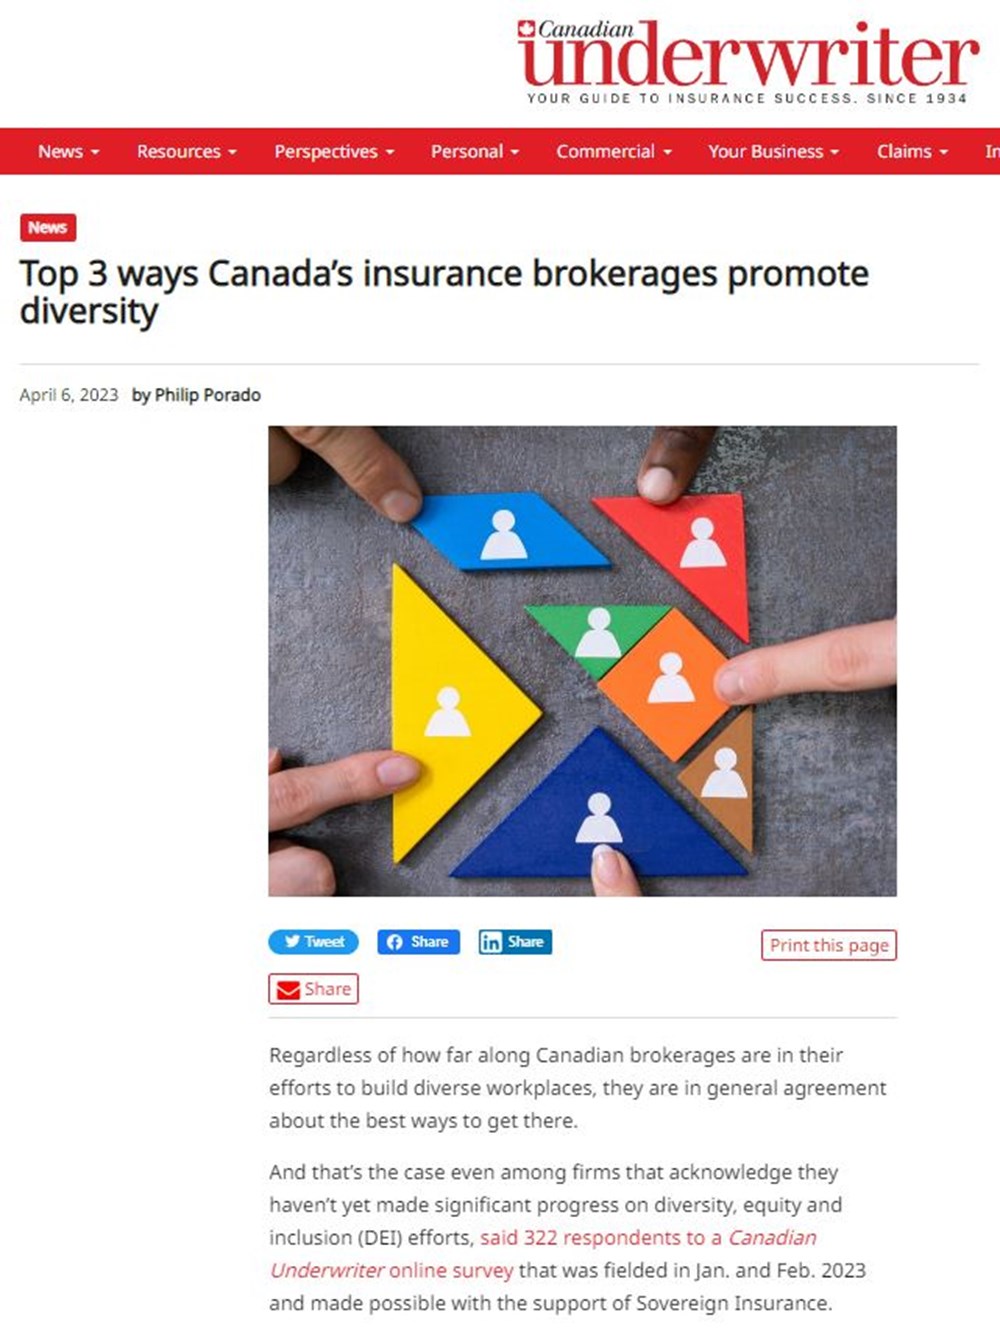 A screenshot of the news article in Canadian Underwriter magazine. There is a picture of colourful geometric shapes with small people icons on each shape.